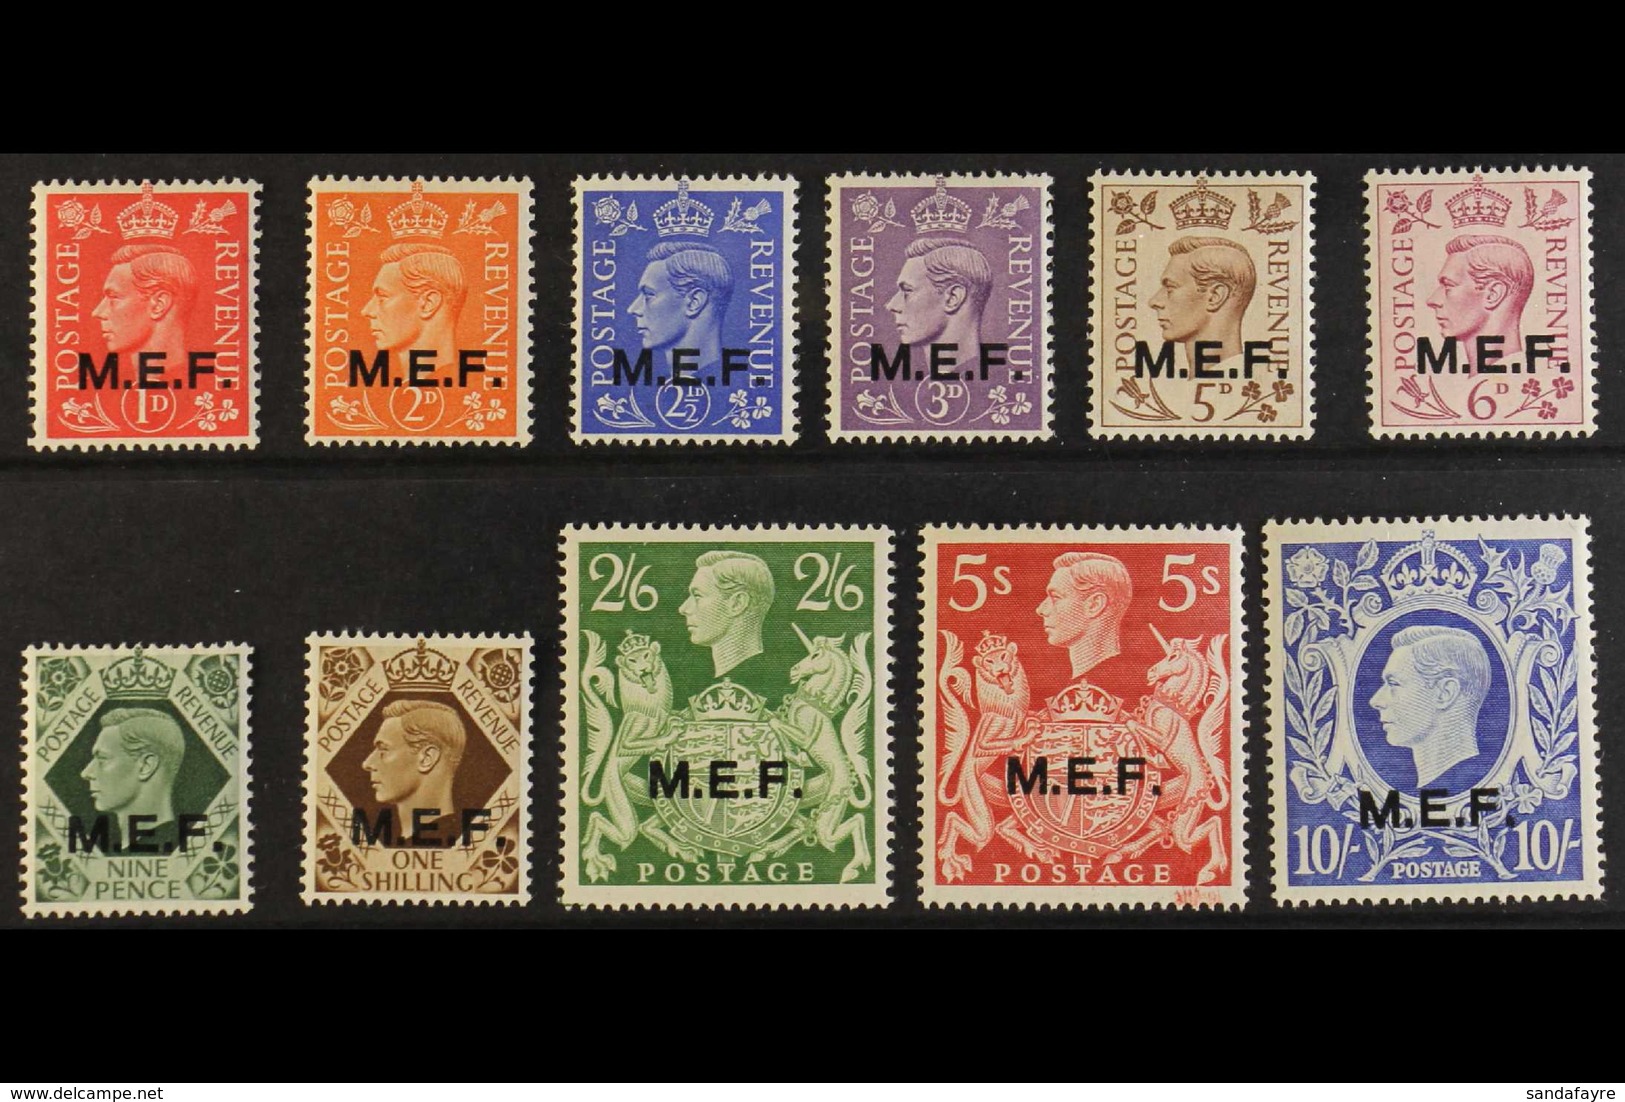 MIDDLE EAST FORCES   1943-47 M.E.F Overprinted GB Set, SG M11/21, Never Hinged Mint (11 Stamps) For More Images, Please  - Afrique Orientale Italienne